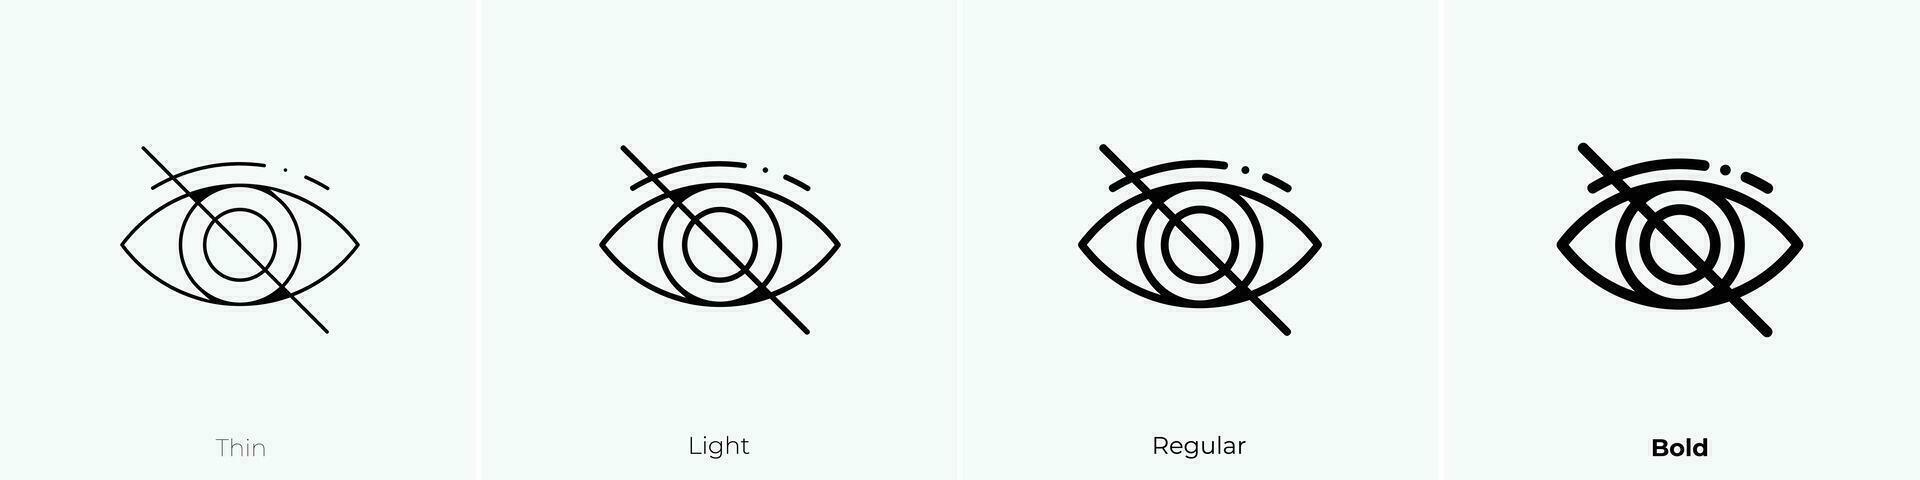 red eye icon. Thin, Light, Regular And Bold style design isolated on white background vector